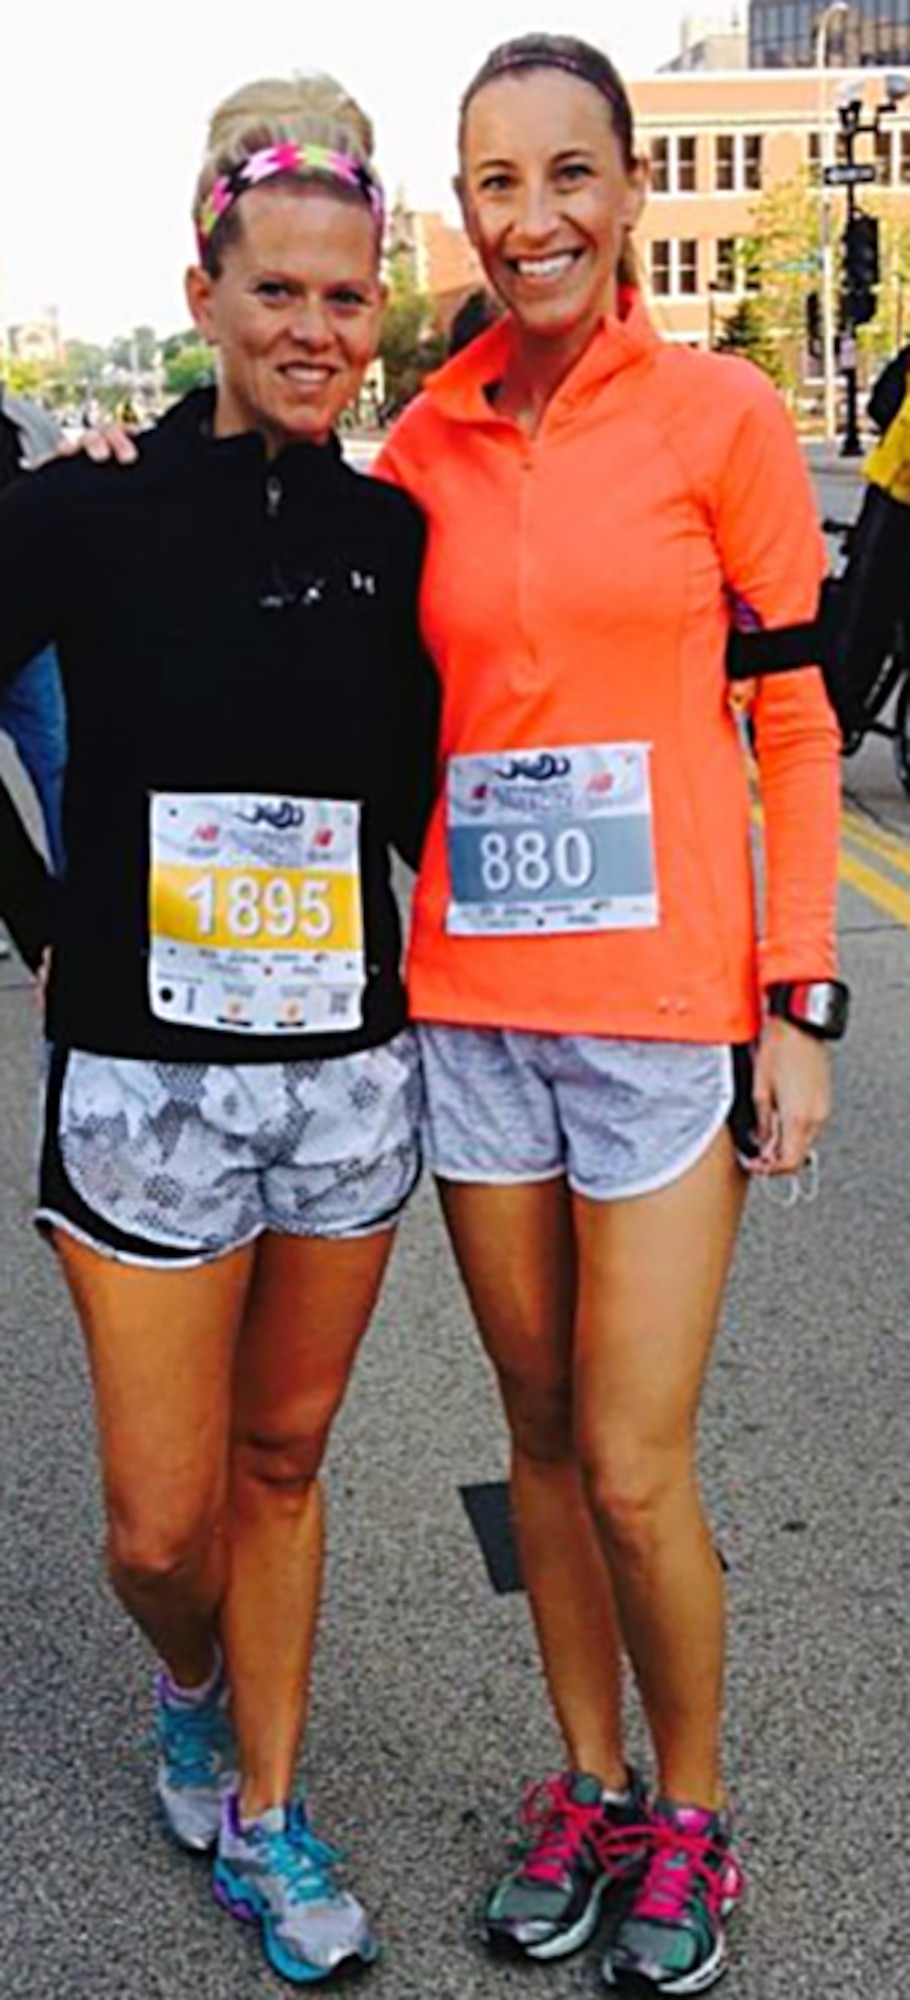 U.S. Air Force 1st Lt. Allison R. Schore, right, a medical administrative officer with the 182nd Medical Group, takes a photo with a friend before running a half-marathon in this undated photo in Peoria, Ill. Schore relied on good foundations in mental, physical, social and spiritual wellness in the aftermath of witnessing a shooting at a restaurant while with her family. (Photo courtesy of Allison Schore/Released)